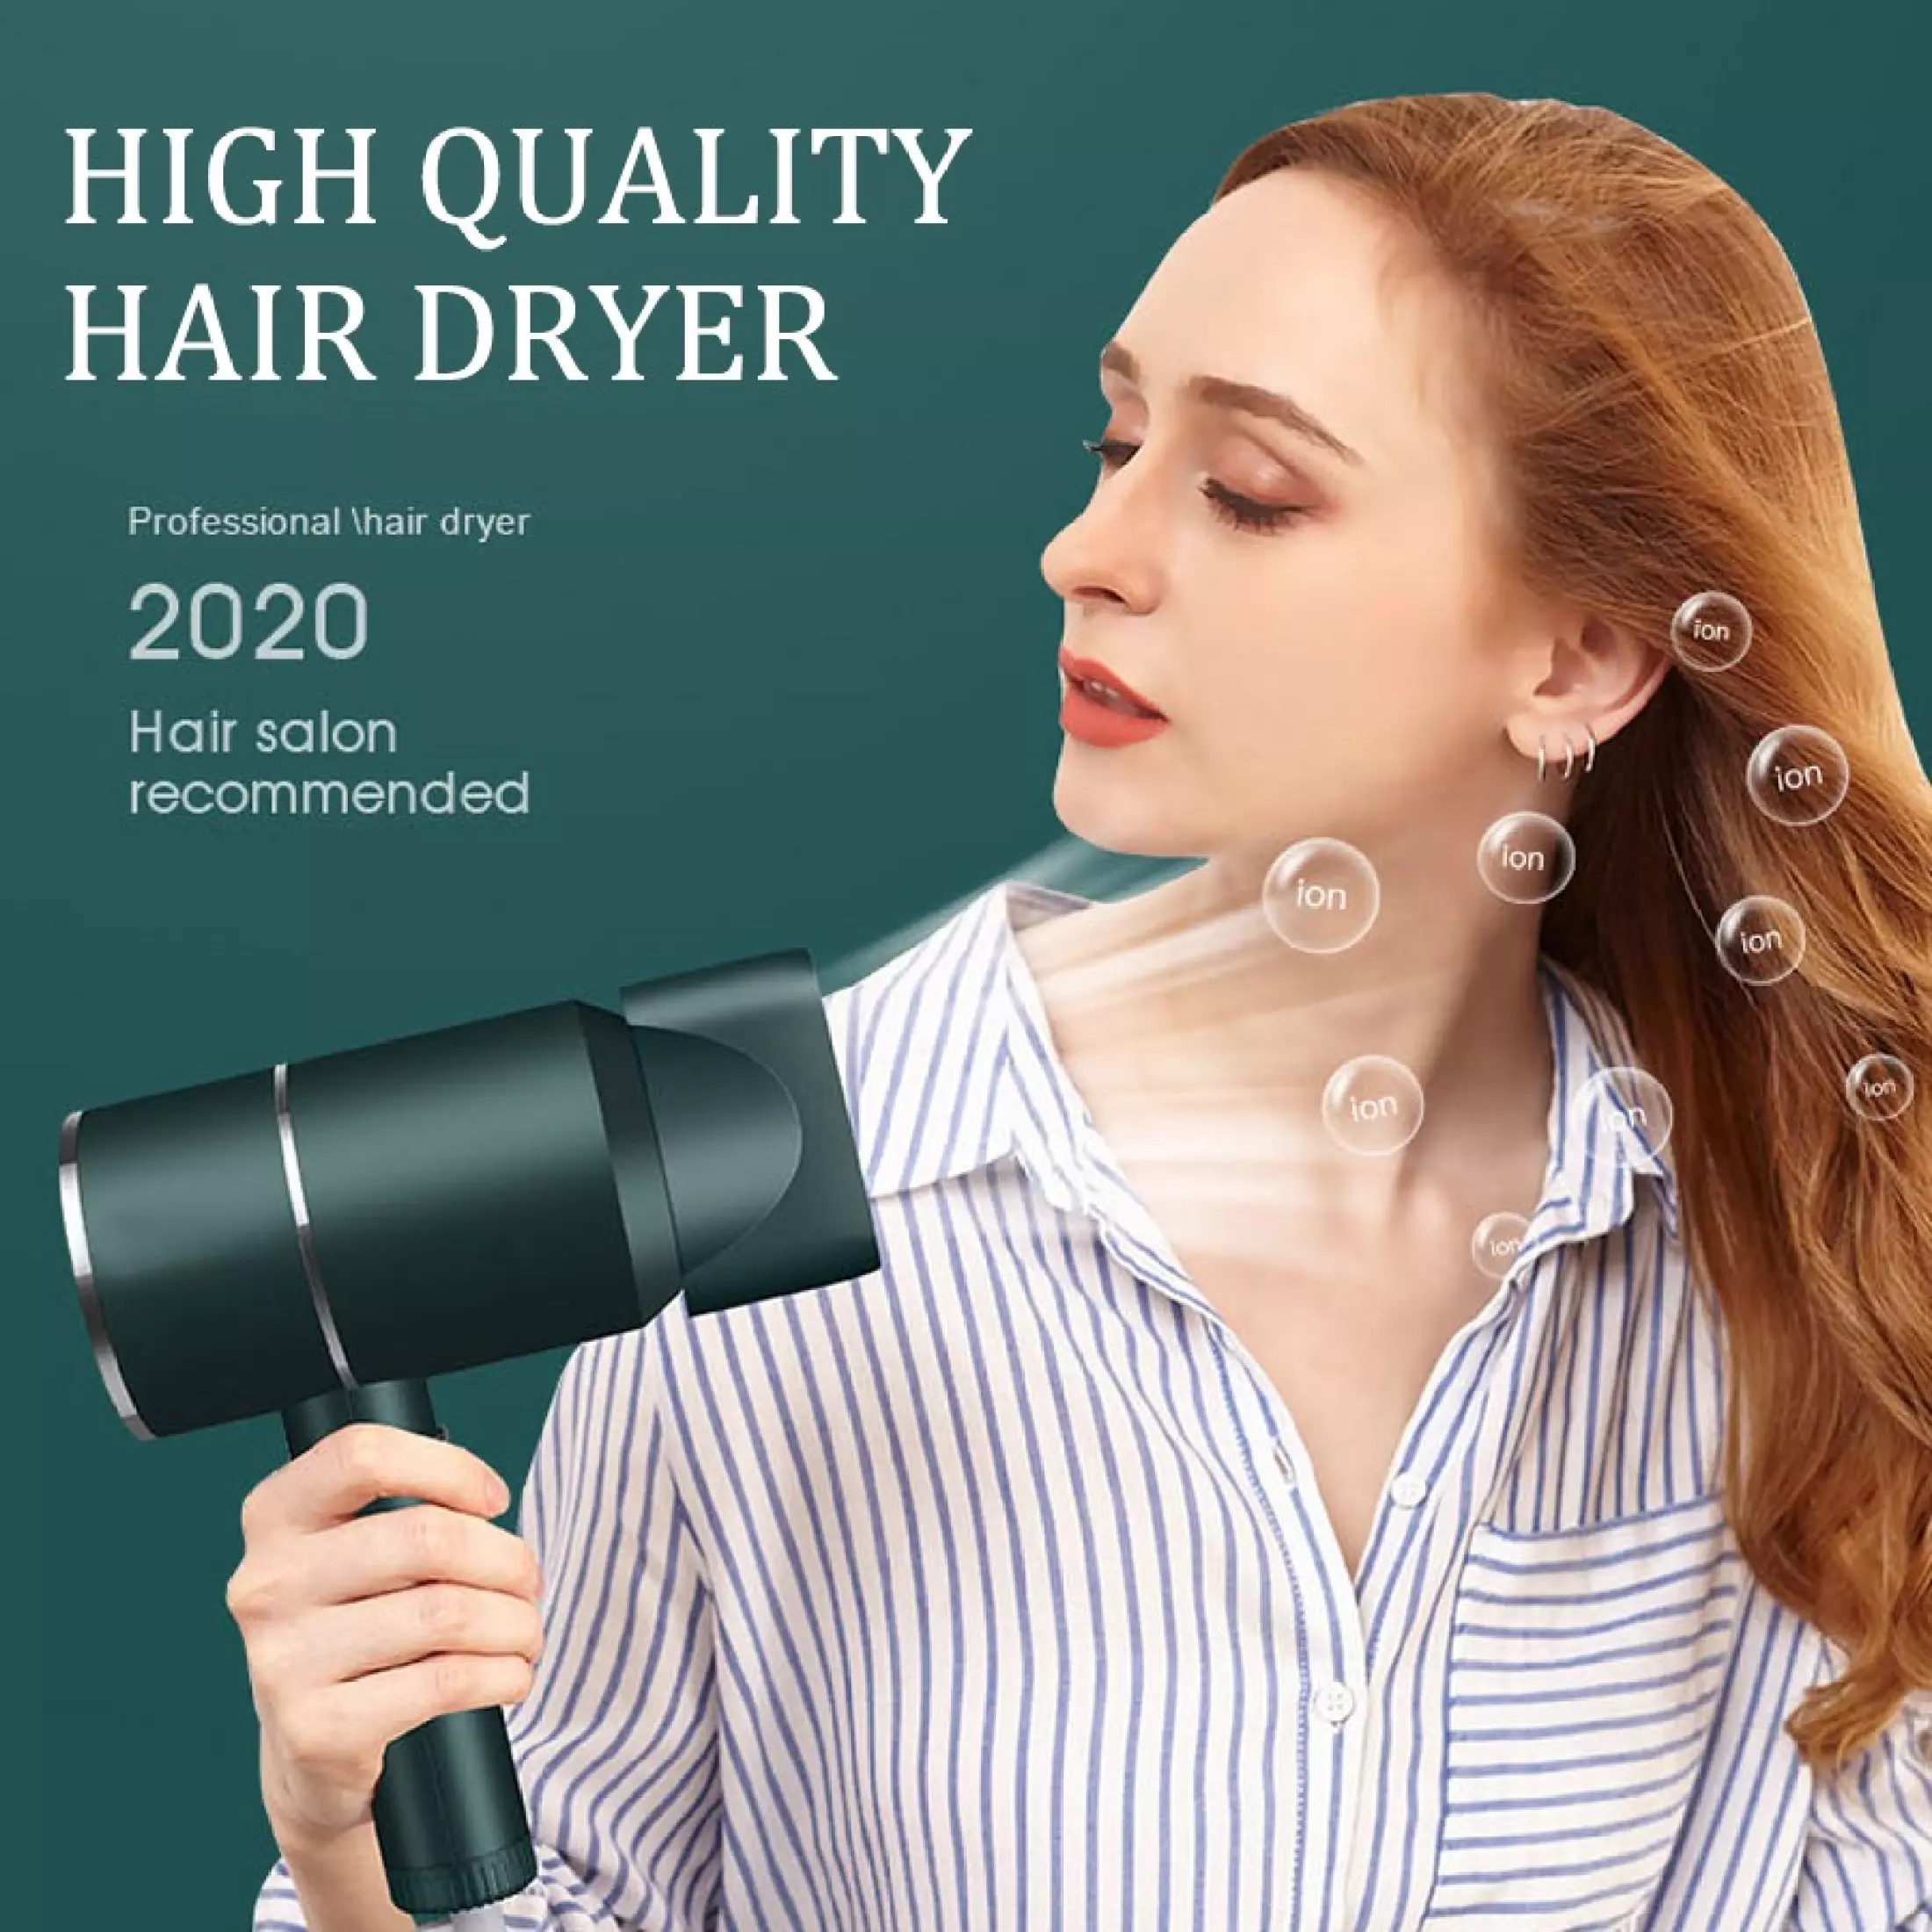 1875W Hair Dryer, Ifanze Professional Ionic Hair Blow Dryers with 3 Heat  Settings, 2 Speed, Cool Settings,Fast Drying Blow Dryer for  Home,Travel,Salon and Hotel - Walmart.com